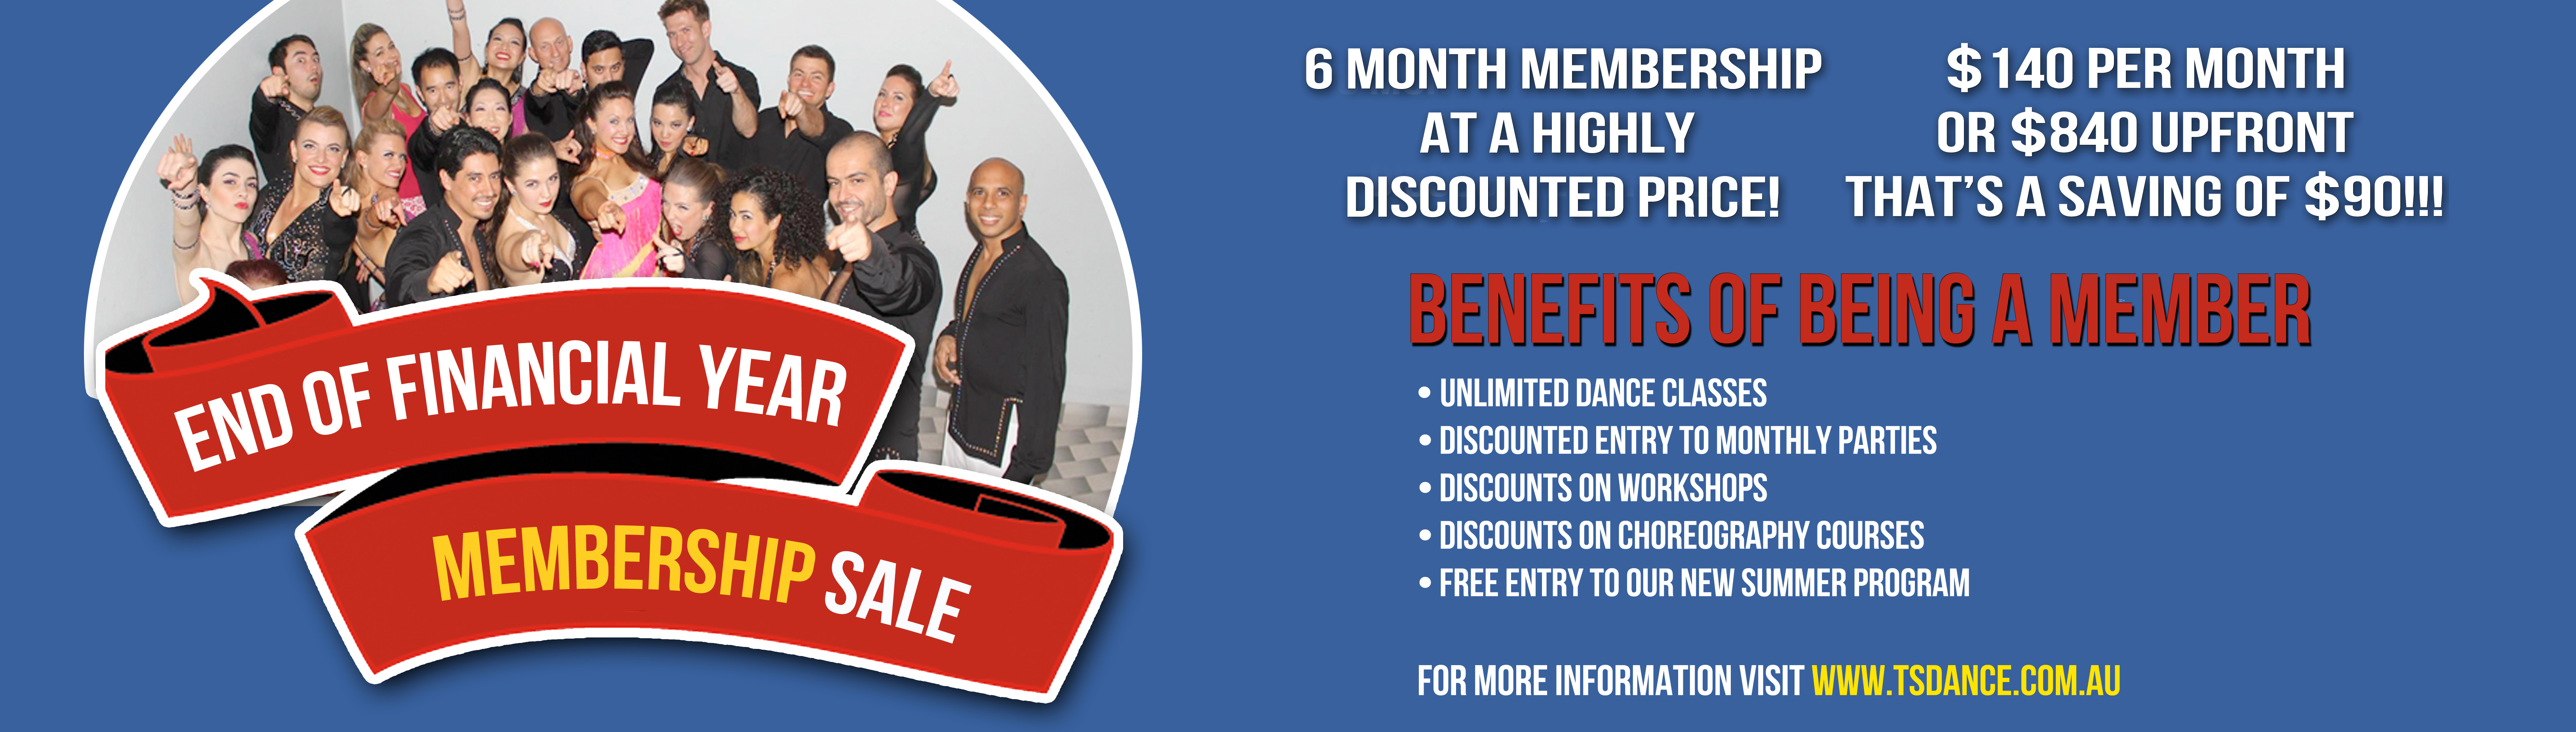 End of financial year membership sale! Limited time offer!